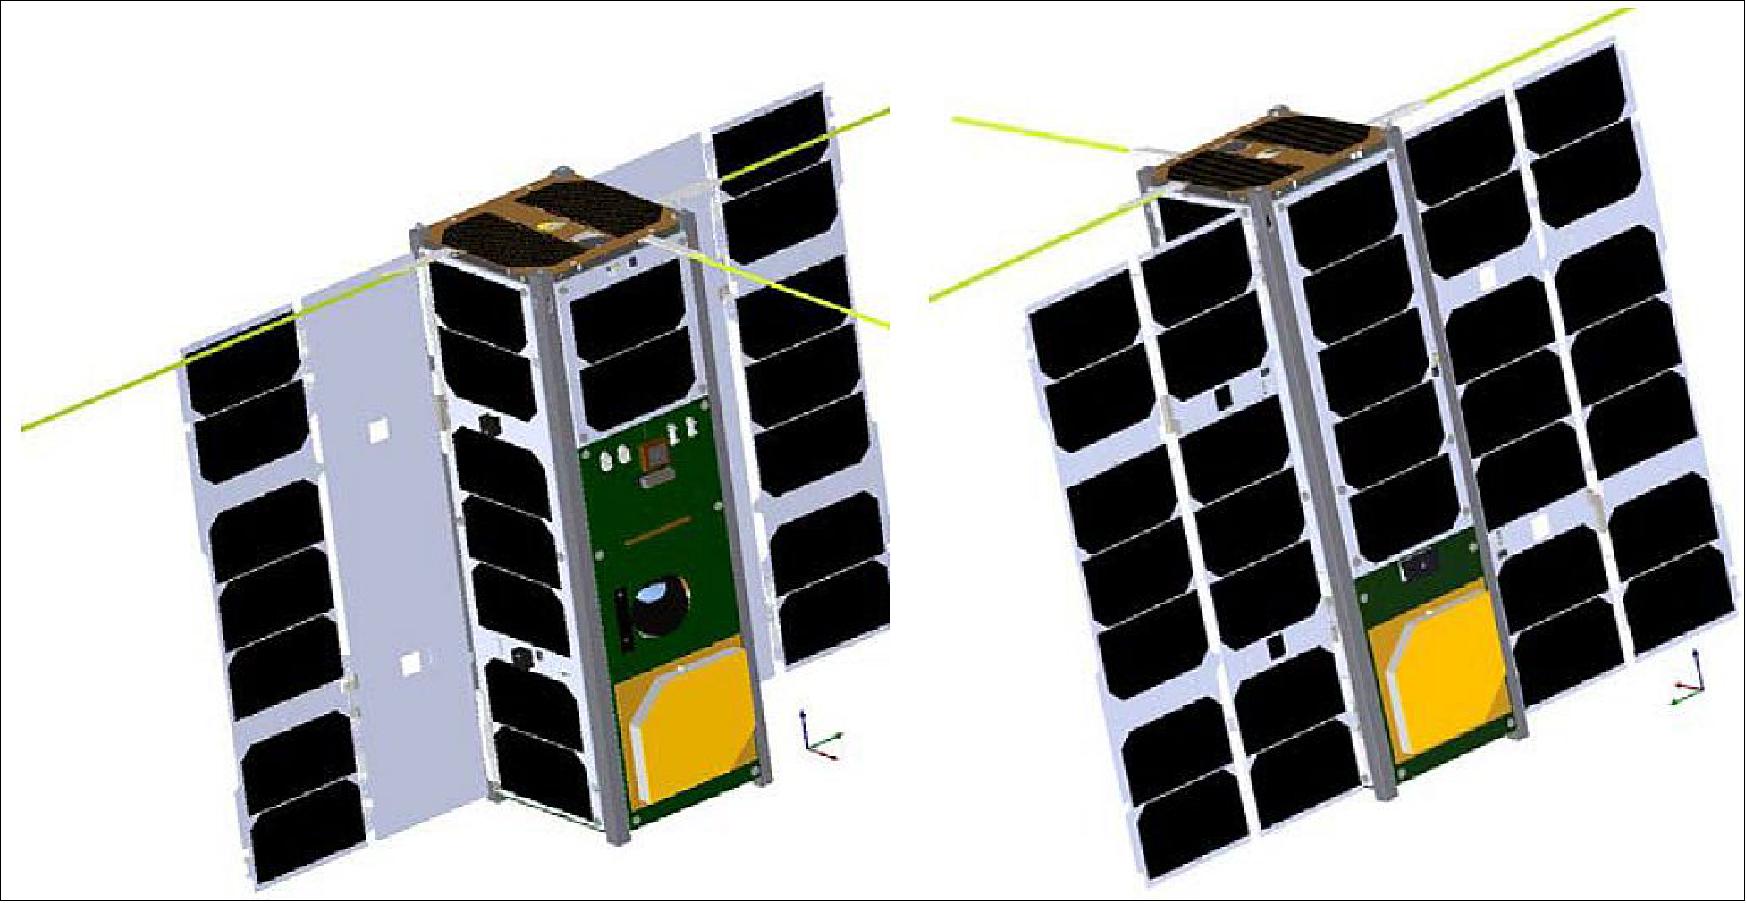 Figure 1: Illustration of the OPS-SAT nanosatellite configuration with solar arrays deployed; left: front view; right: rear view (image credit: ESA)